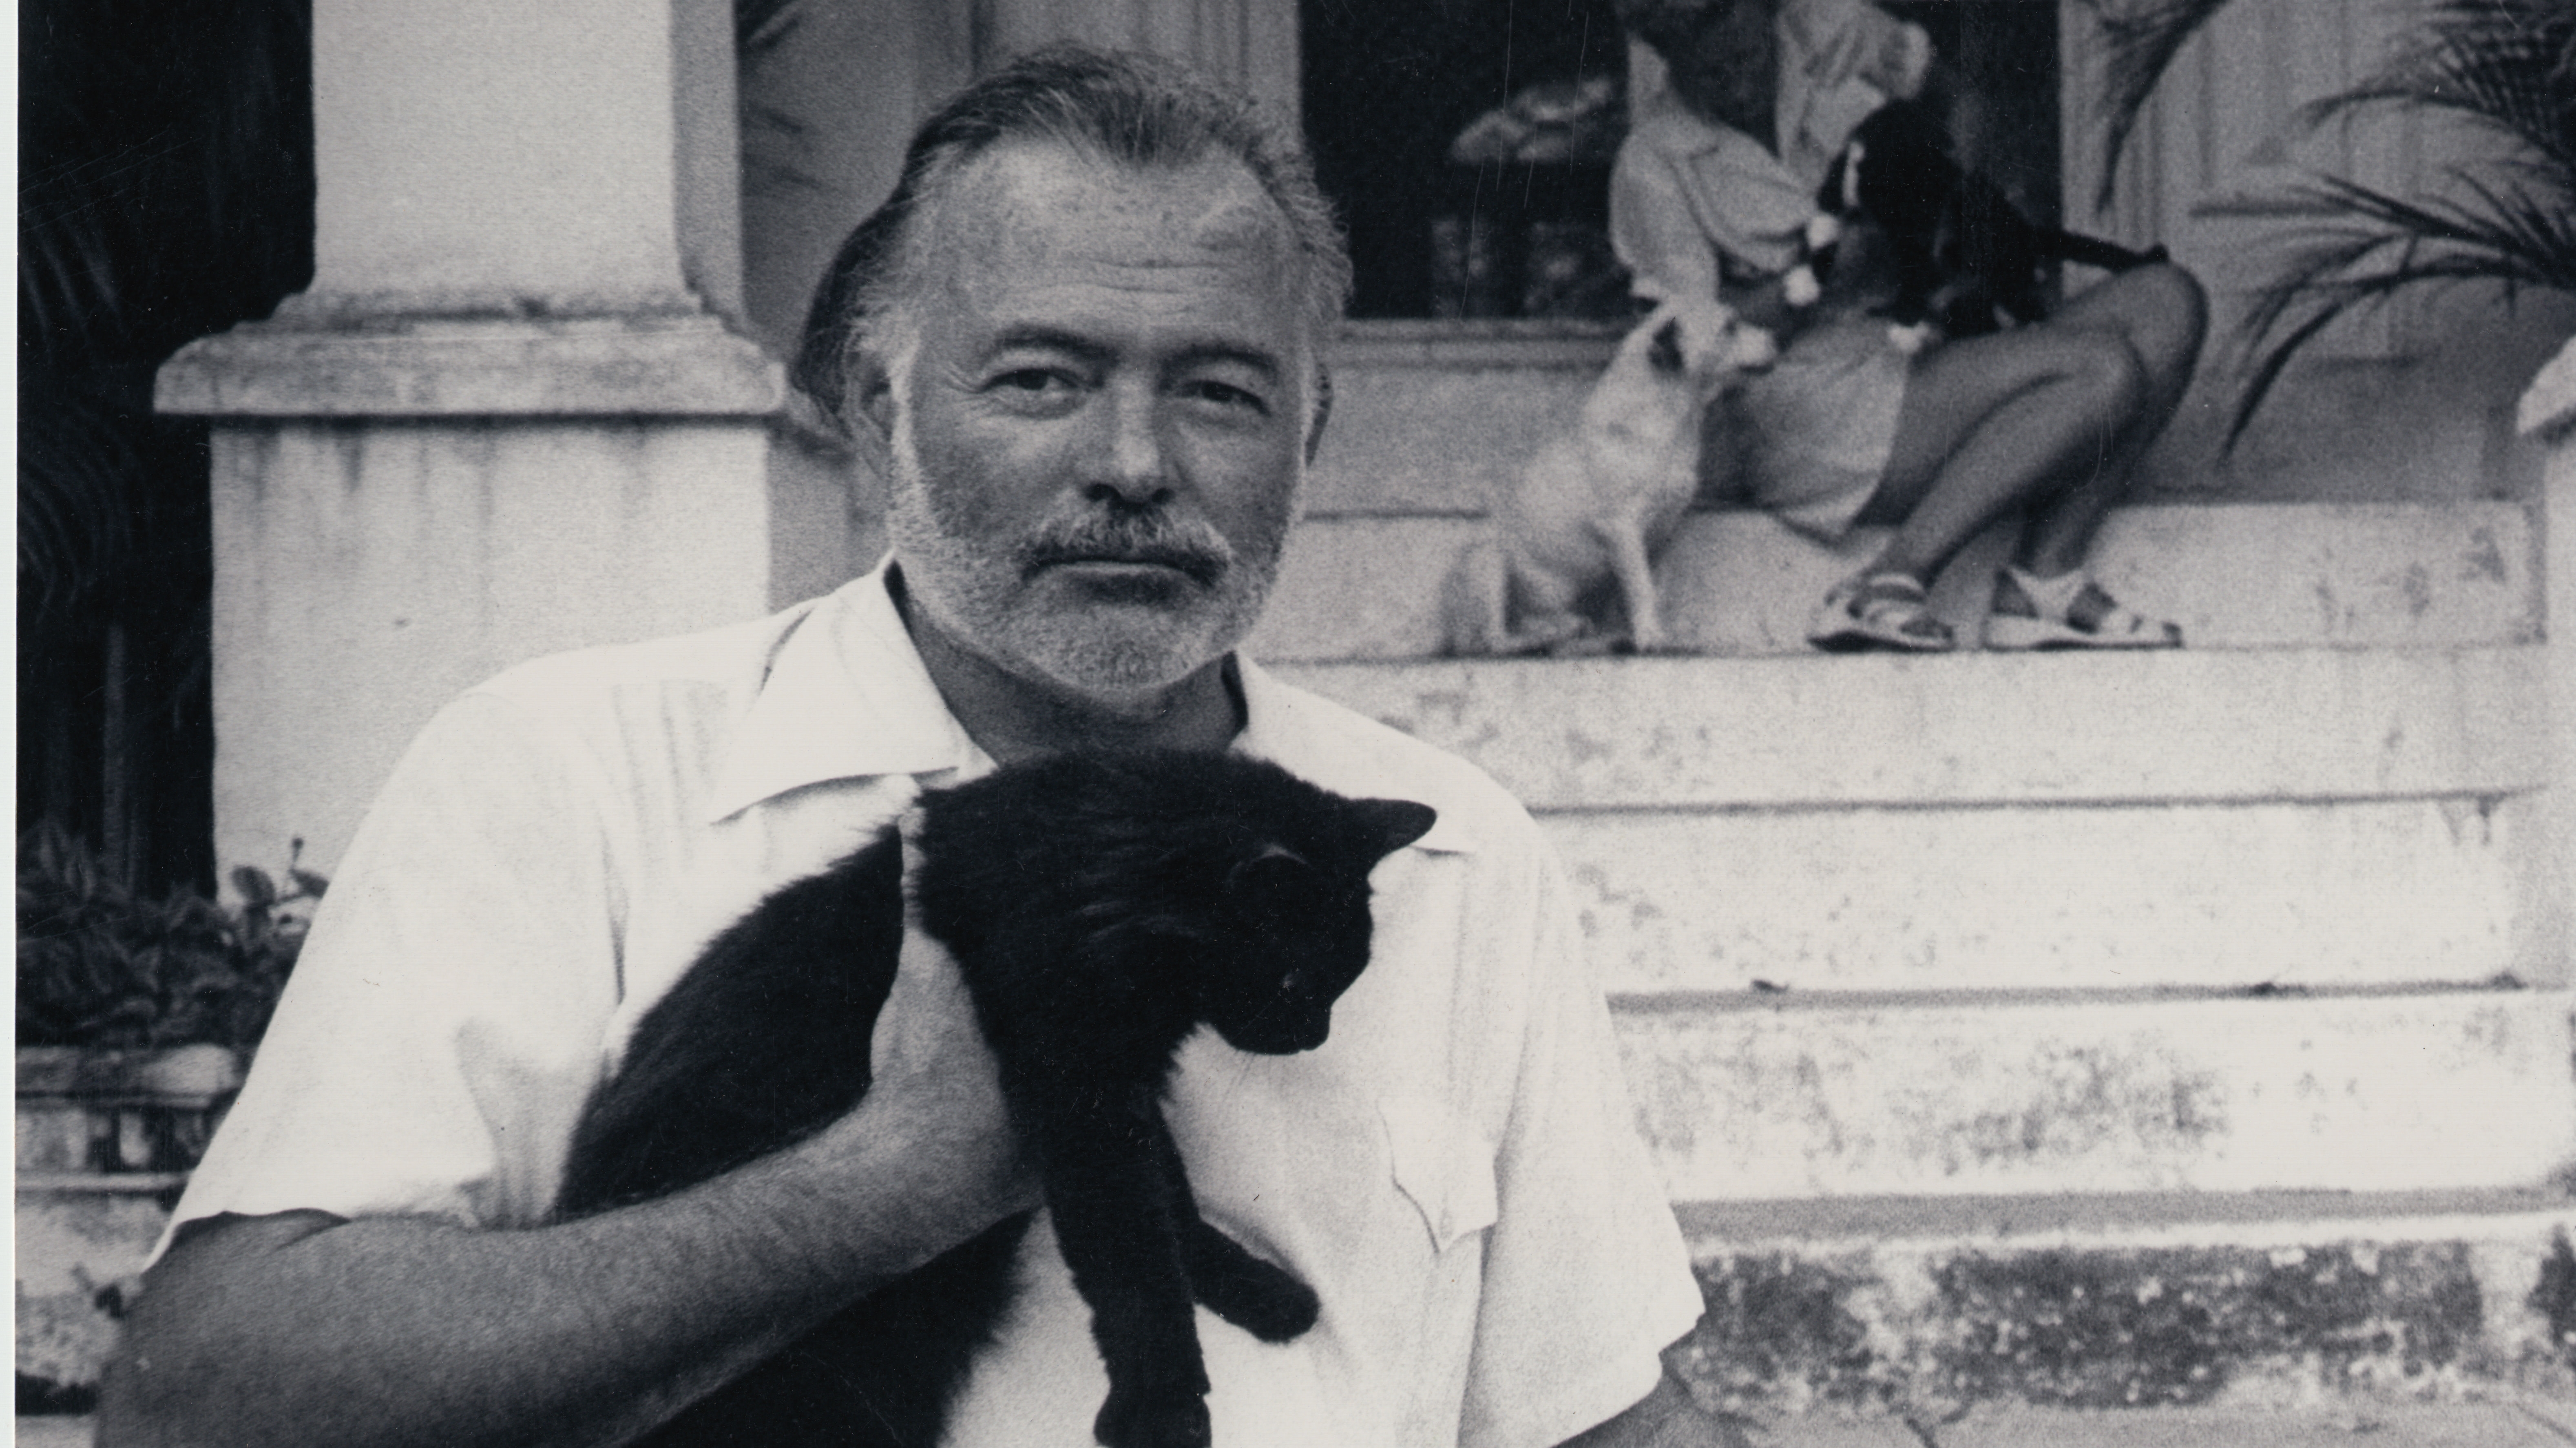 PBS’ Hemingway is an immersive portrait of the author’s brilliance and cruelty